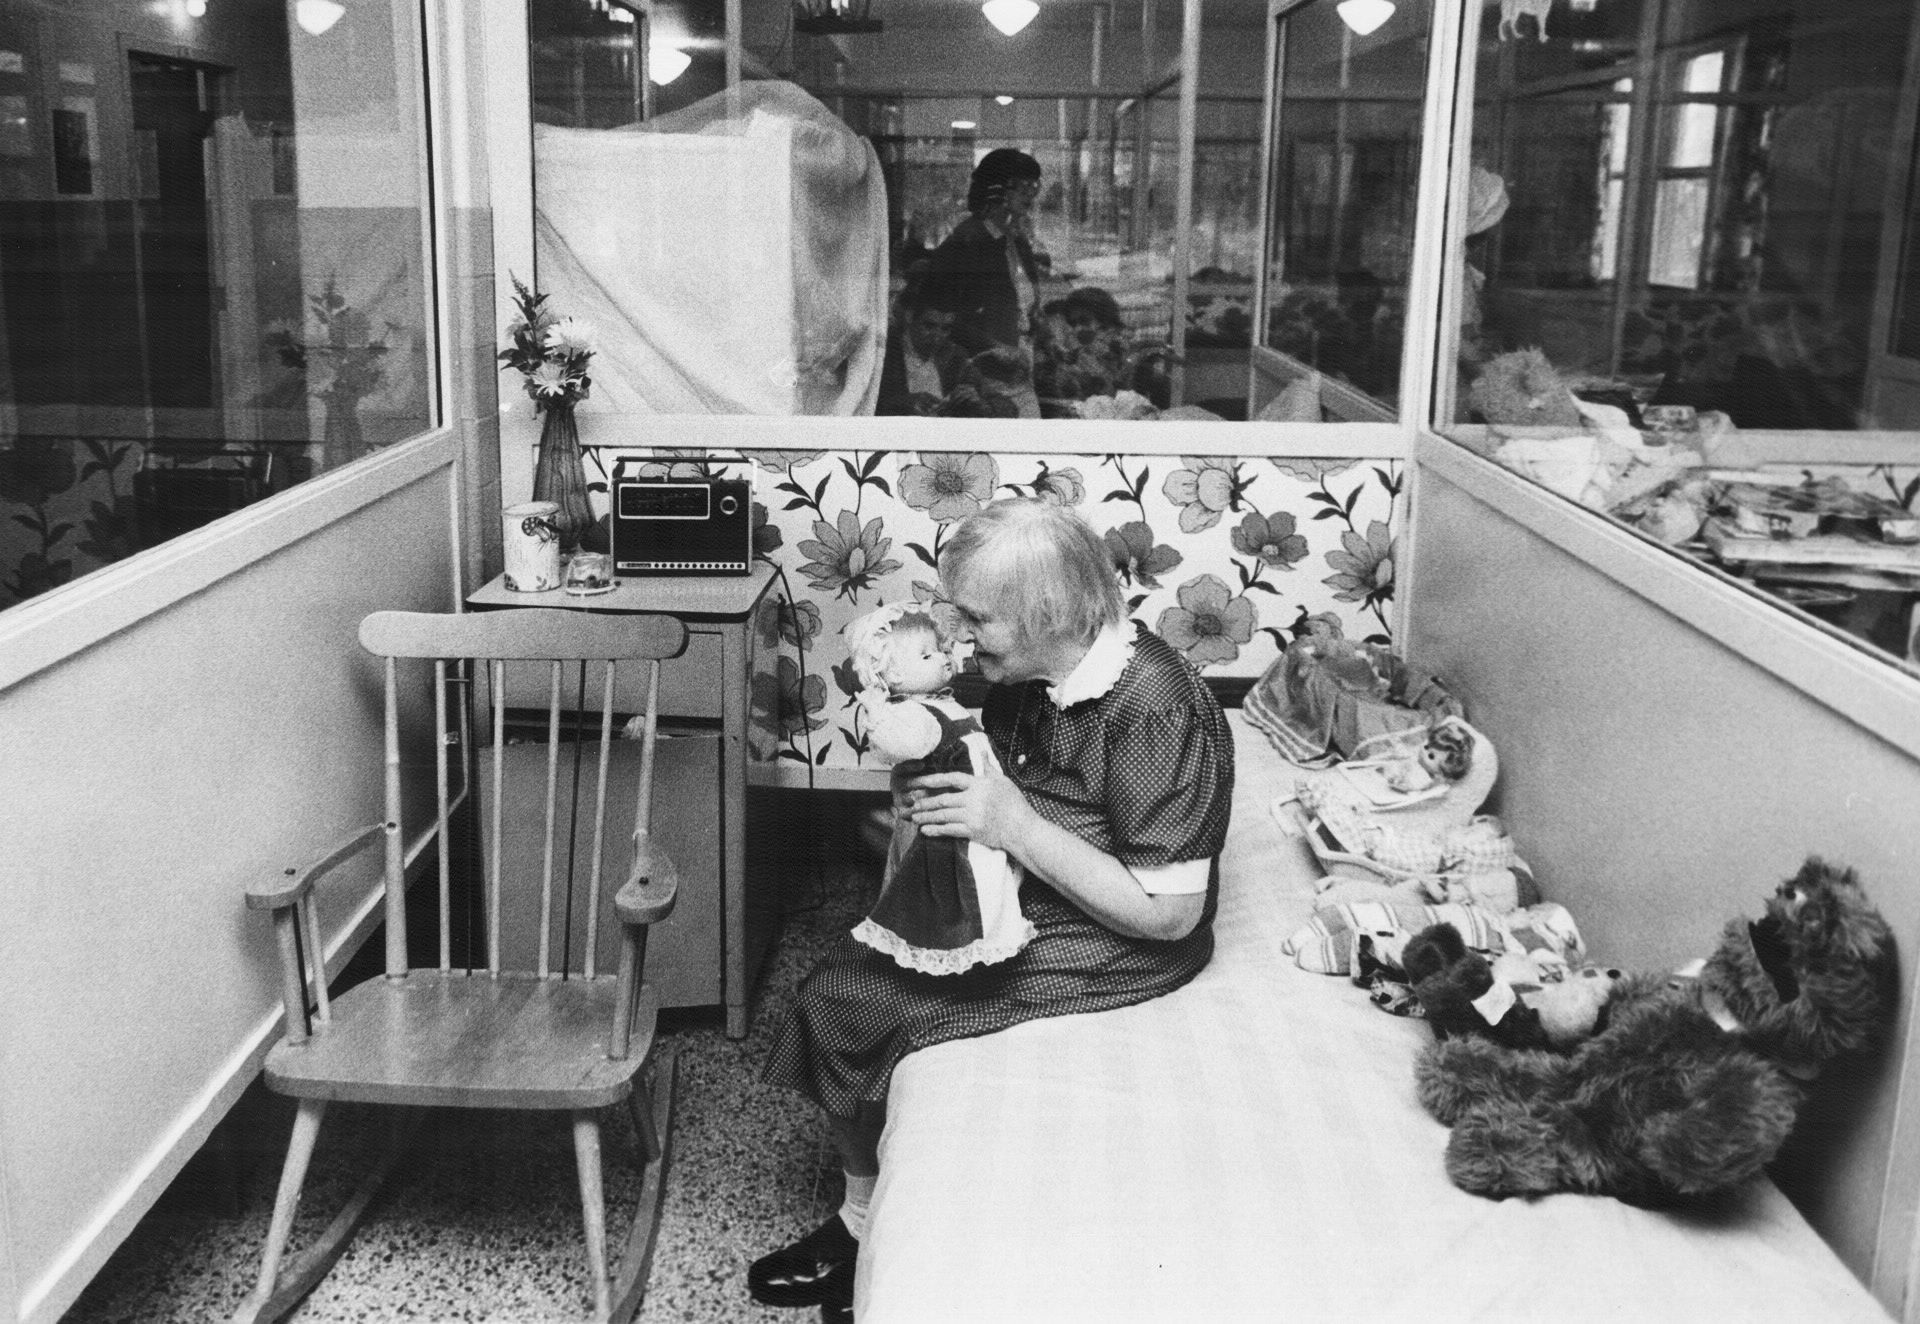 Living conditions at the Huronia Regional Centre in 1982. The image shows a small cubicle with walls mostly made out of clear glass. One side of the cubicle is taken up by a narrow bed, on which there is a row of dolls and stuffed toys. Next to this bed is a wooden rocking chair and a small night table with items on top of it, including a vase of flowers and a radio. An elderly woman is sitting on the bed, holding a doll. Given her age, she was likely institutionalized as a child in the early 20th century and spent her entire life in the facility. Image from the Toronto Star Archives.